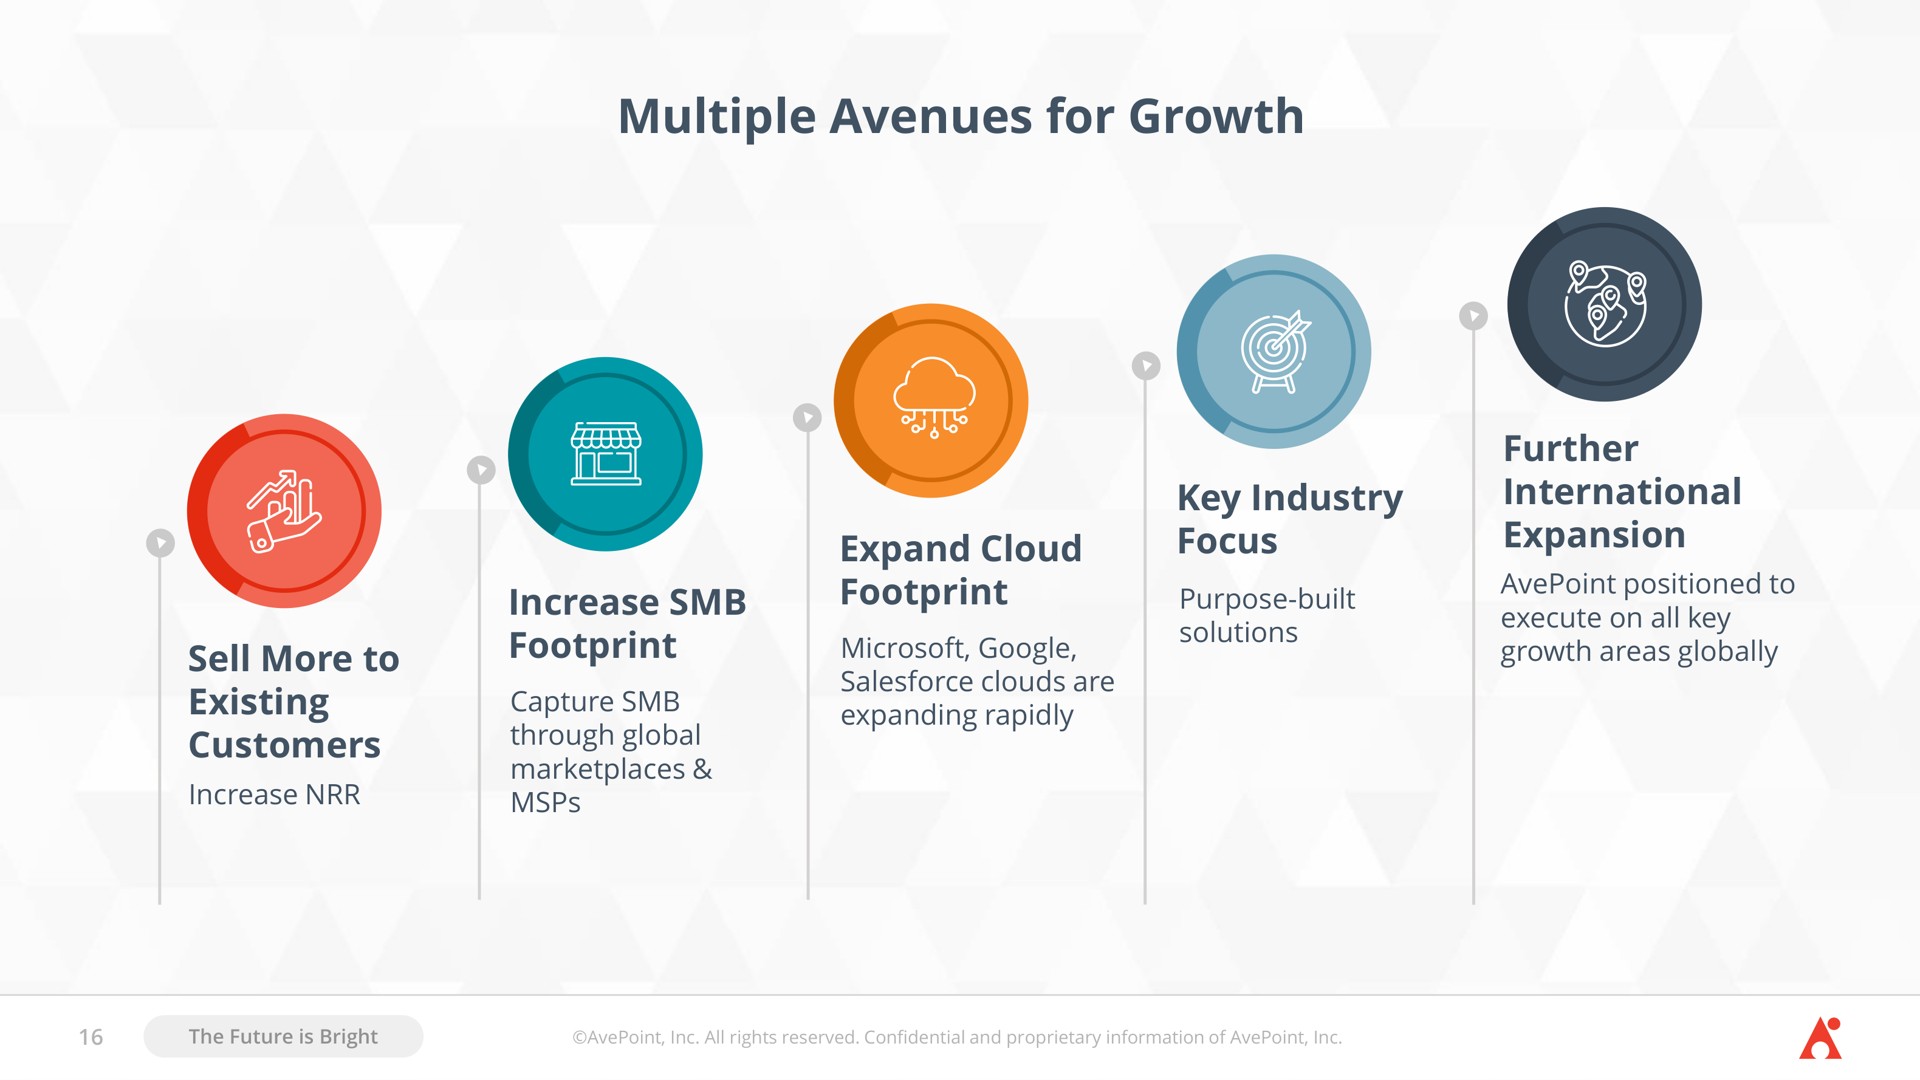 multiple avenues for growth i key industry focus purpose built expand cloud footprint expanding rapidly expansion a existing increase footprint through global | AvePoint